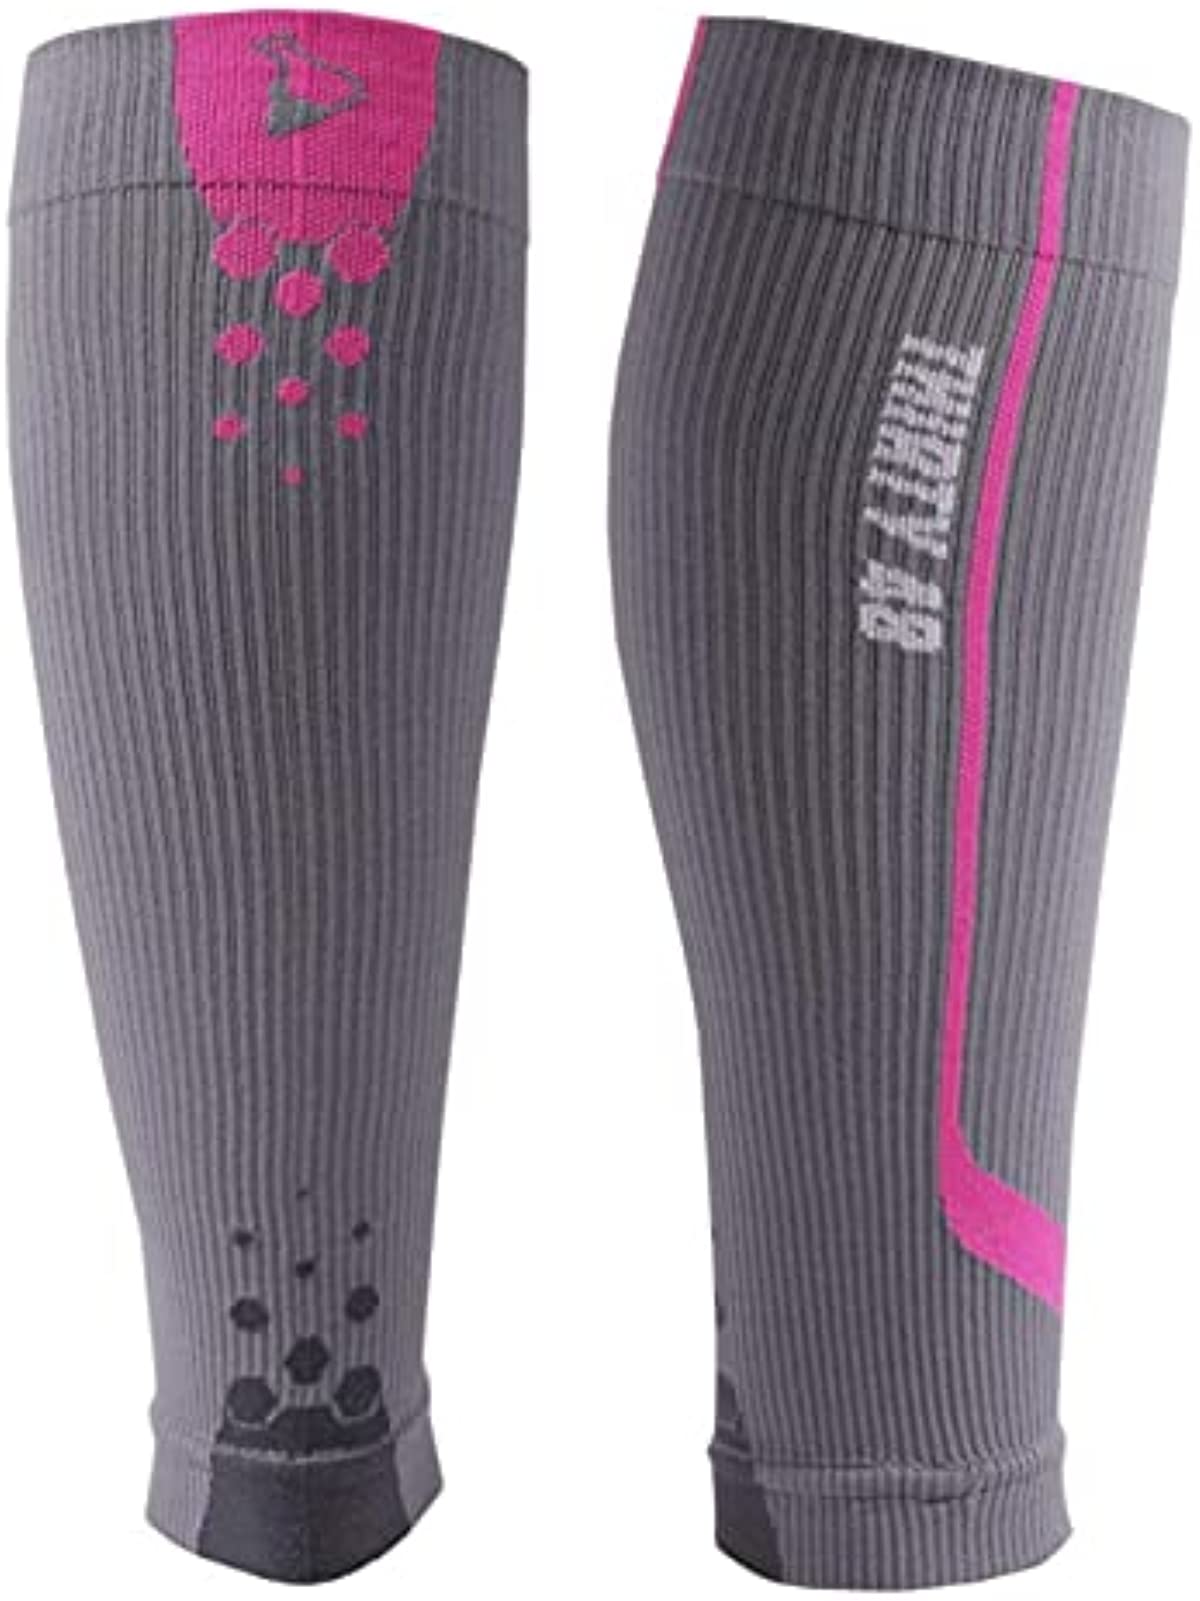 Graduated Compression Sleeves by Thirty48 Cp Series, Calf/Shin Splint Guard Sock; 1 Pair; Maximize Faster Recovery by Increasing Oxygen to Muscles; Great for Running, Cycling, Walking, Basketball, Football Soccer, Cross Fit, Travel; Money Back Guarantee Gray/Pink Small